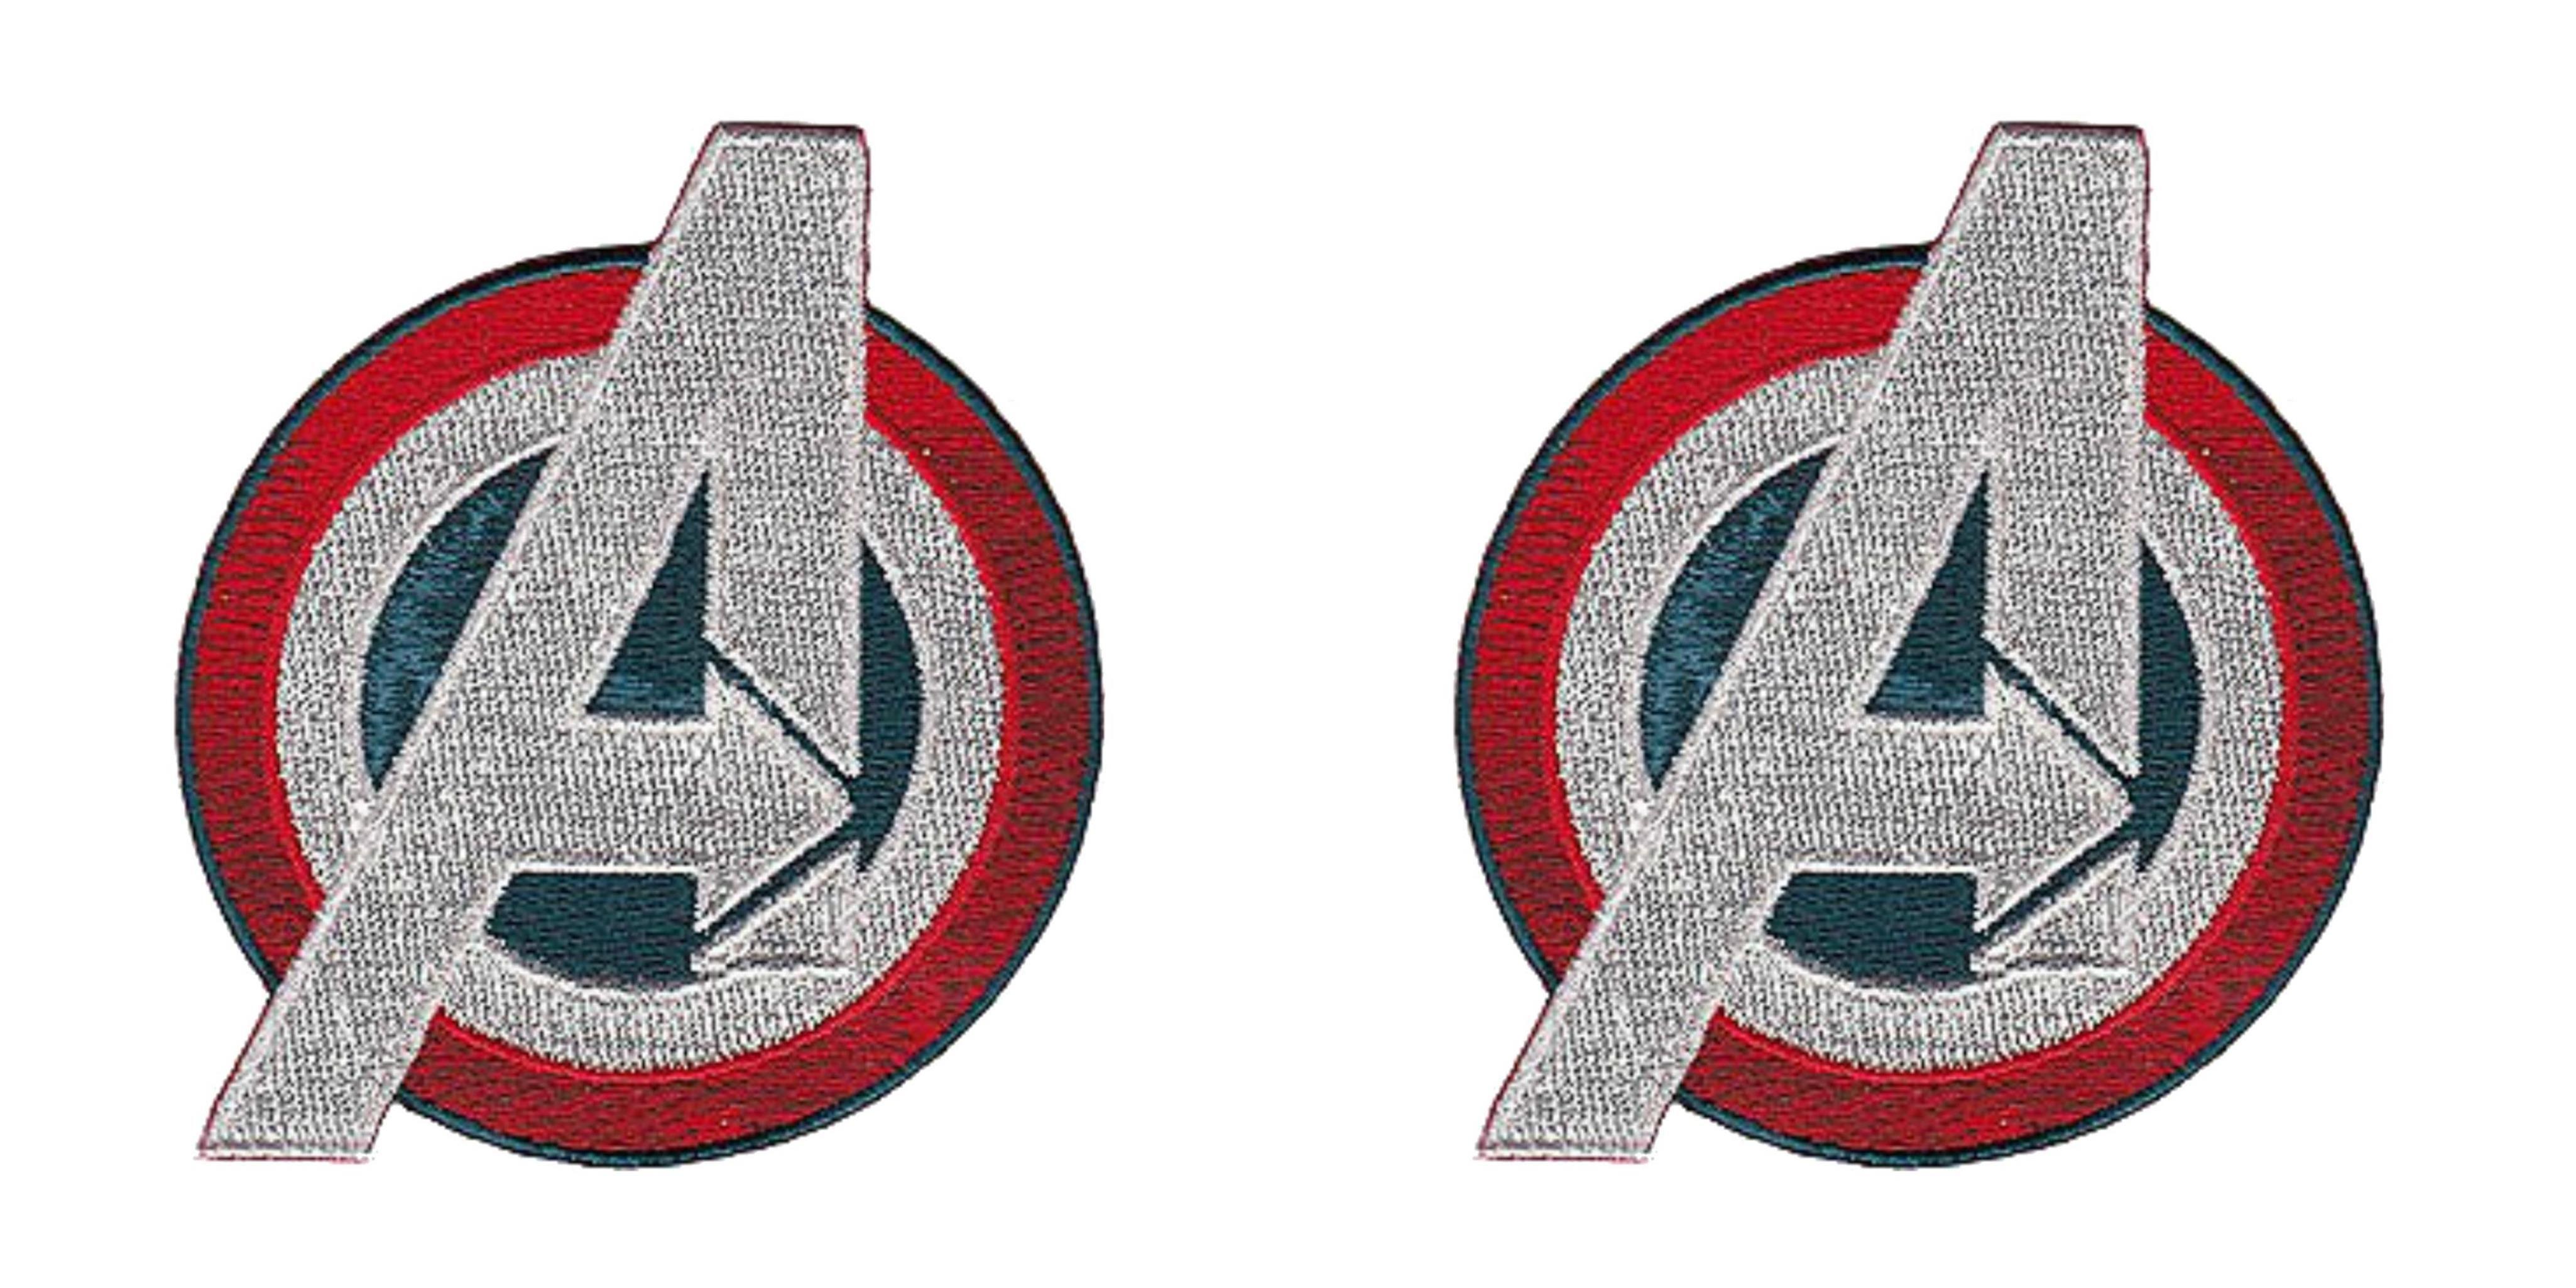 Red and White Oval Logo - Superheroes Marvel Comics Avengers Red, White, and Blue Logo 3 2